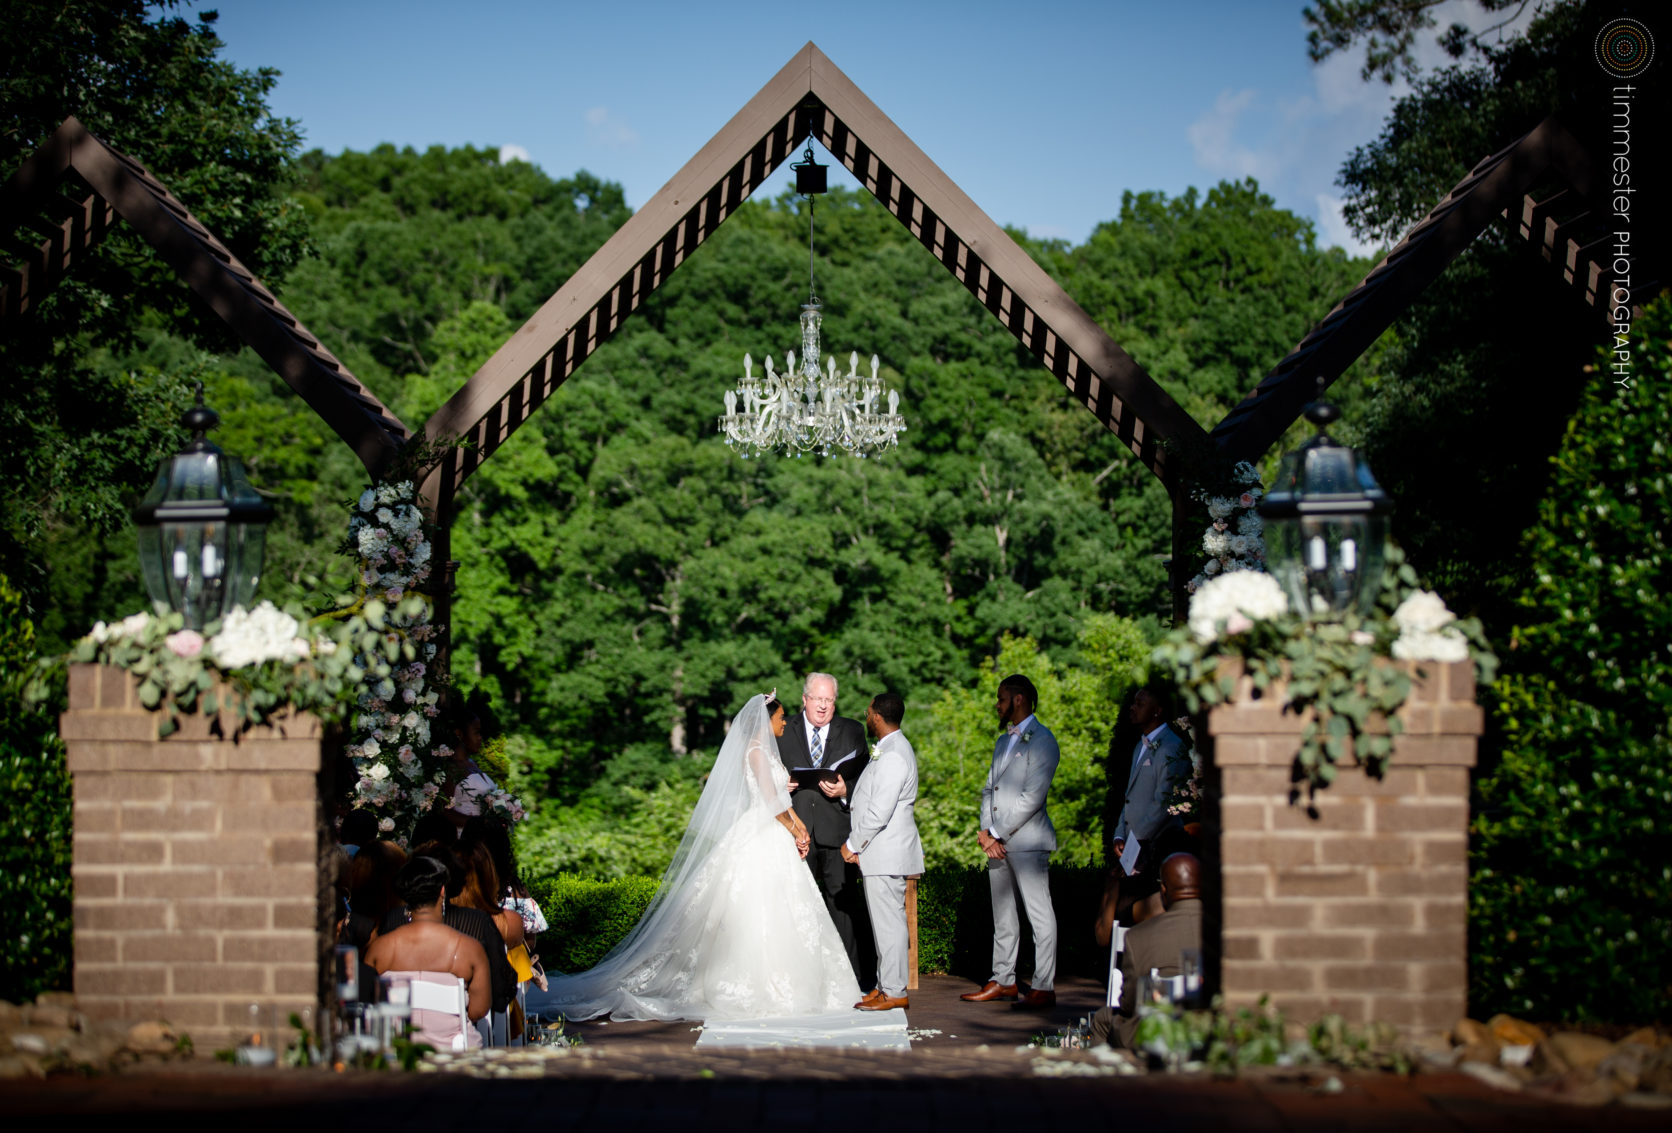 An outdoor wedding ceremony in NC at Highgrove Estate.